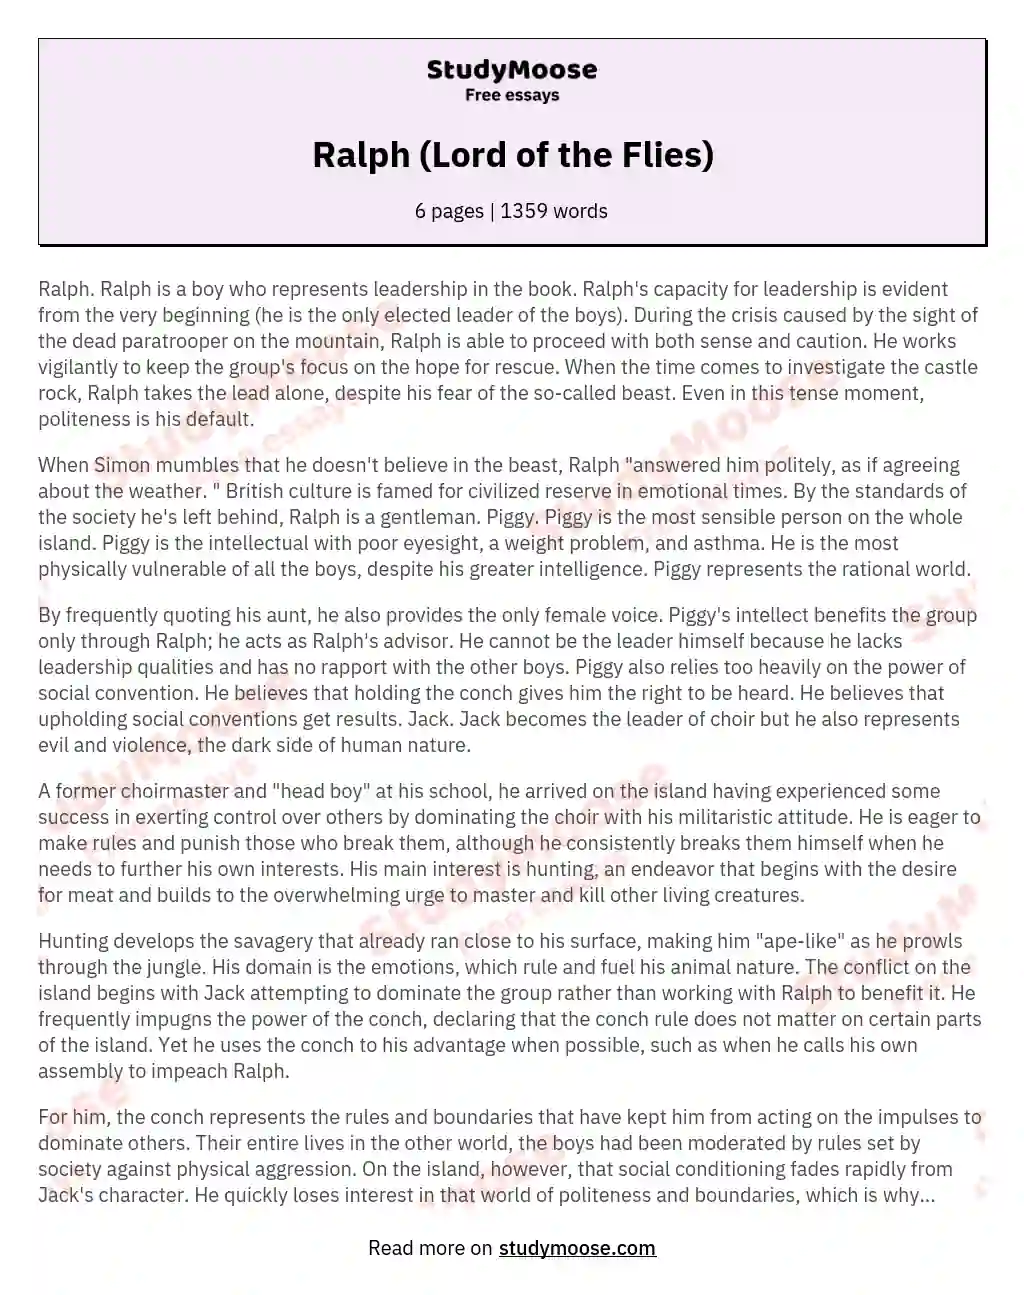 Ralph (Lord of the Flies) essay